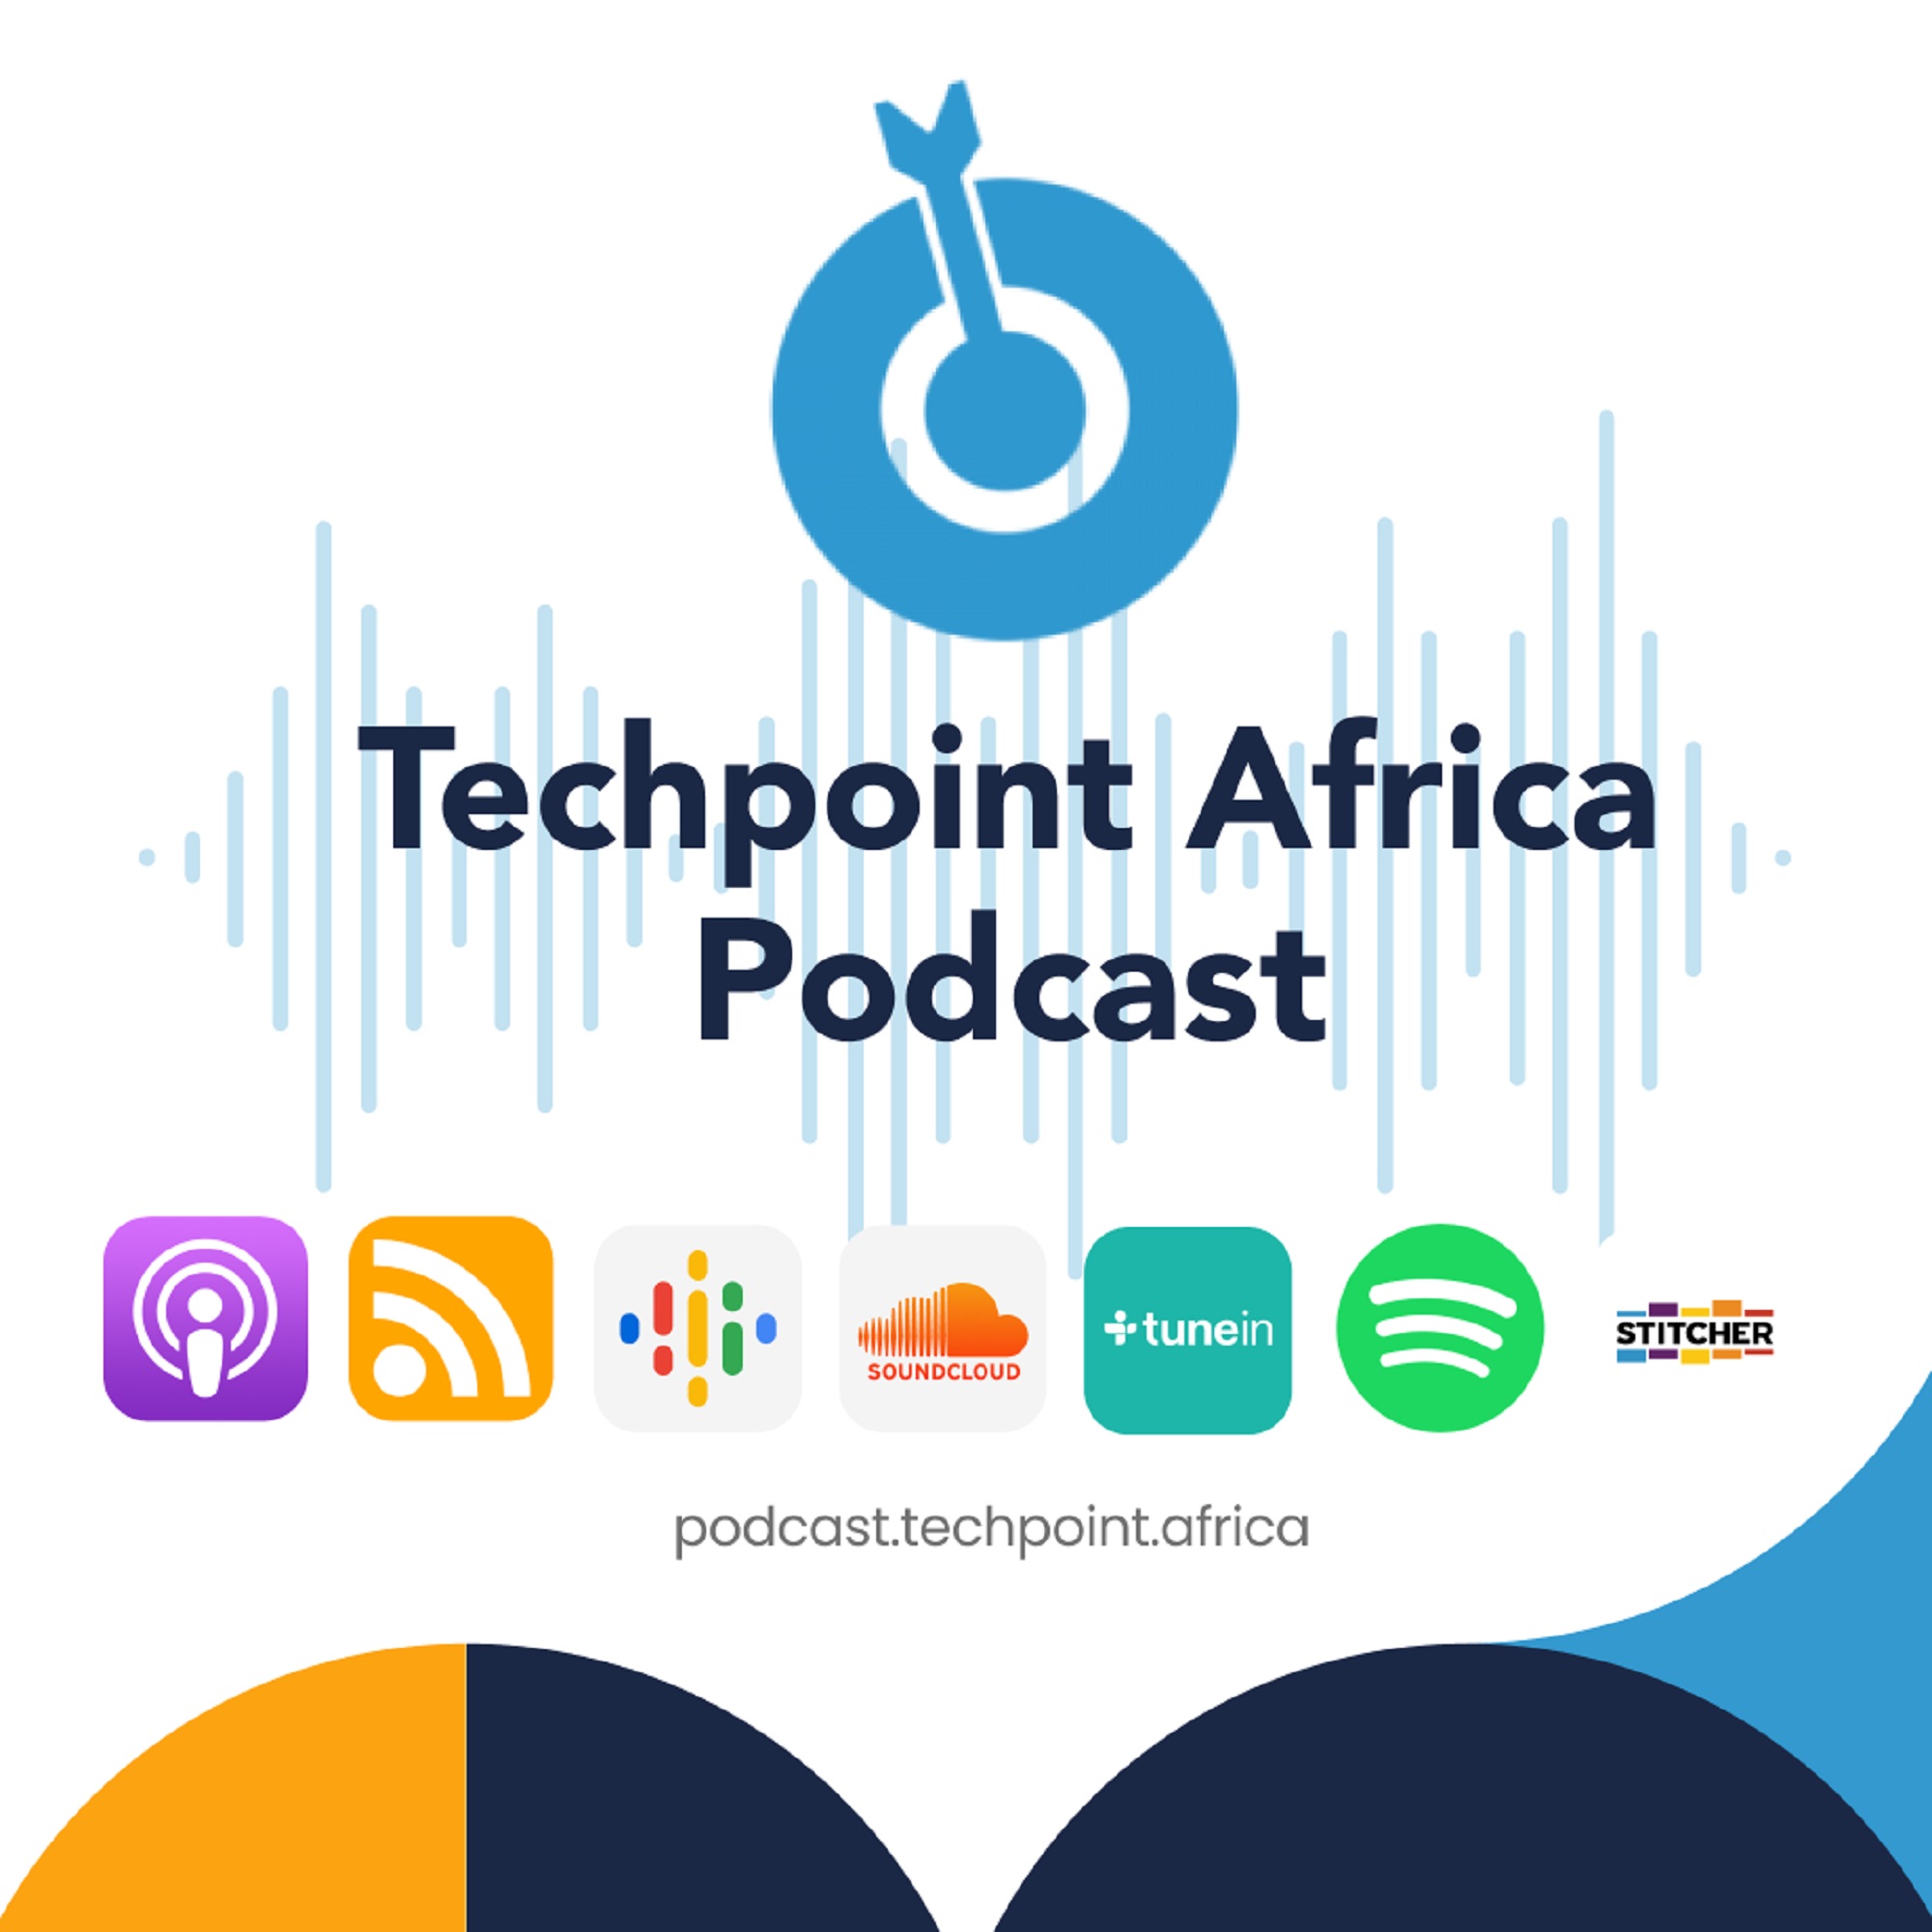 Listen to this before hosting your website in Africa